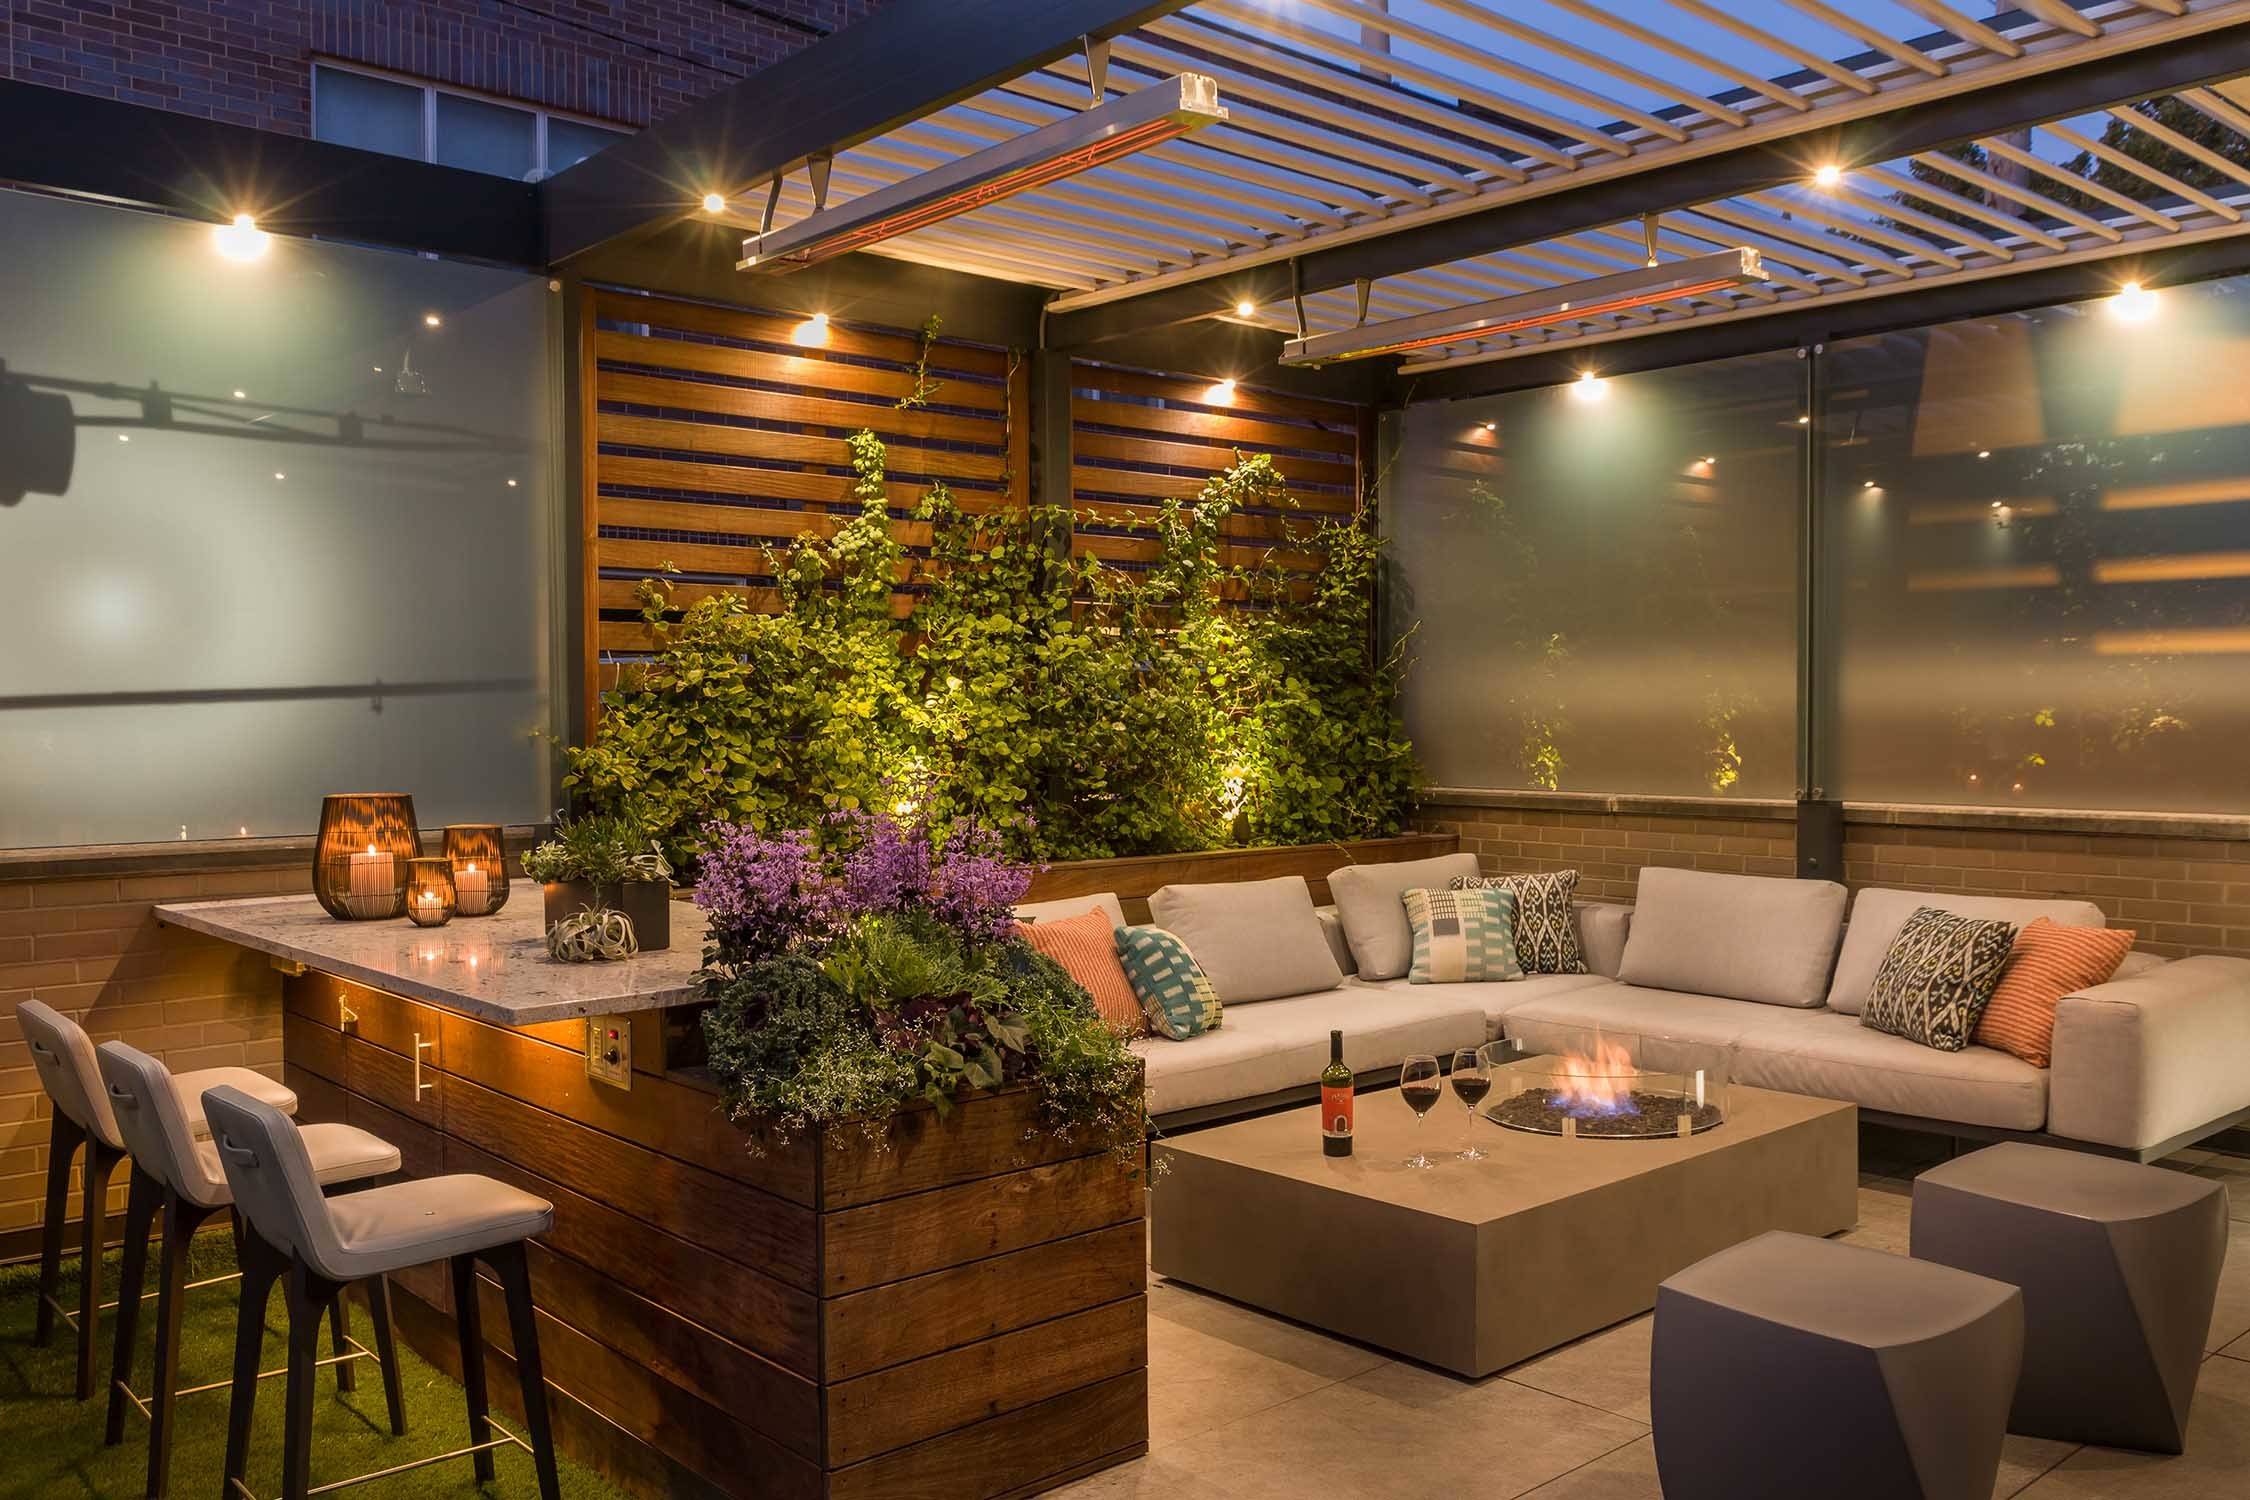 75 Rooftop Ideas You'll Love - May, 2022 | Houzz